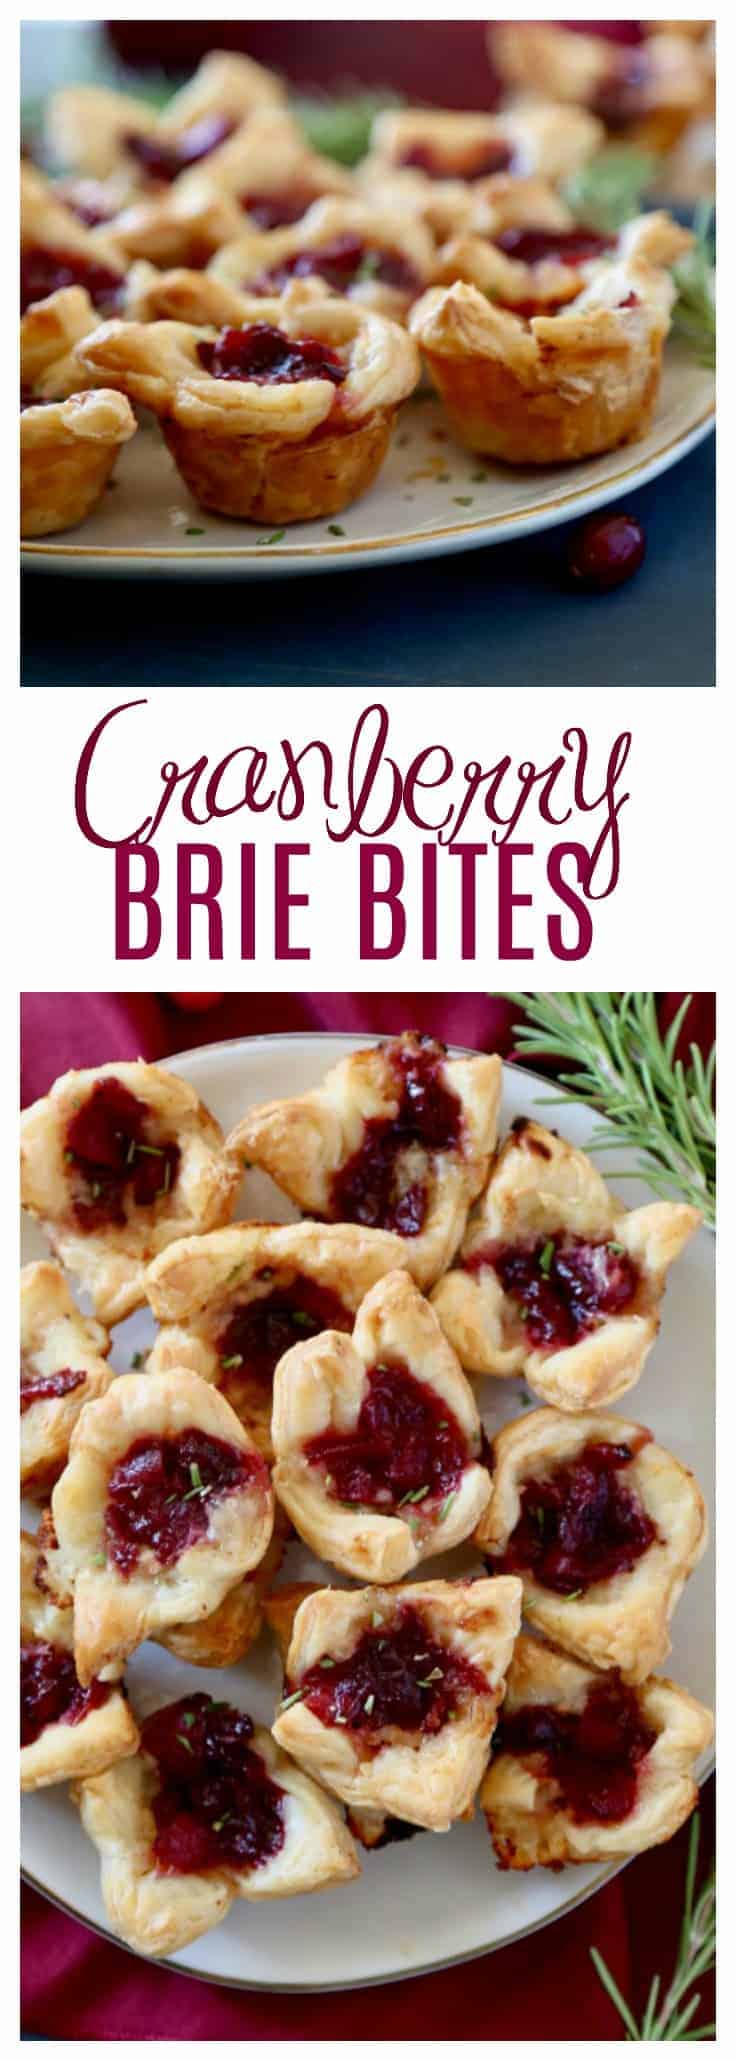 These Cranberry Brie Bites are an easy appetizer to make, festive, and perfect for your holiday party. With only three ingredients keep the focus more on friends and family instead of the food! All you need is a store bought pastry, brie and cranberry sauce (add in some rosemary for garnish) and your guests will be popping these delightful bites of deliciousness into their mouths and begging you for the recipe!